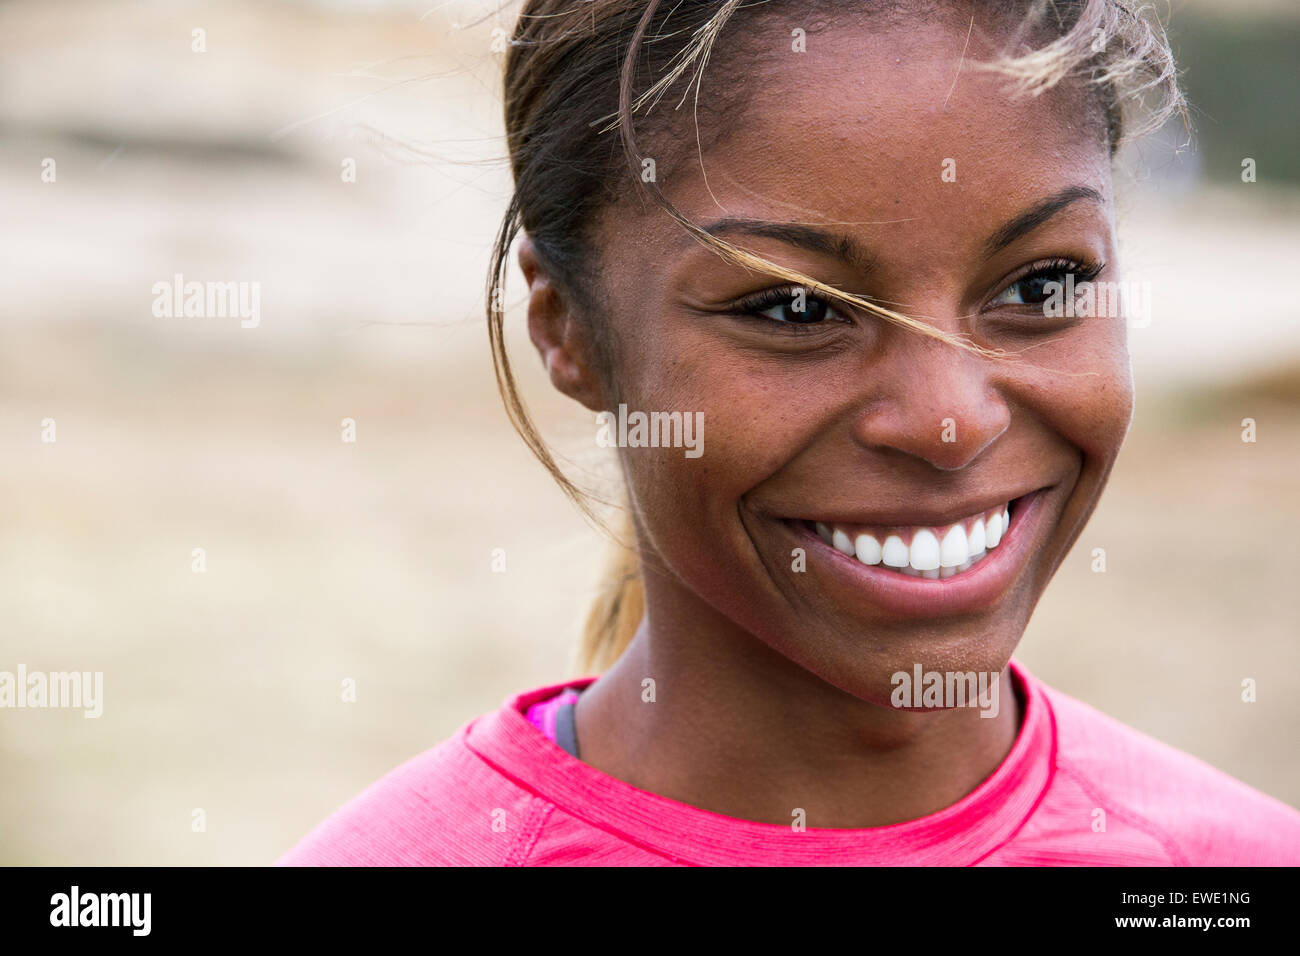 a smiling young black woman face energy Stock Photo